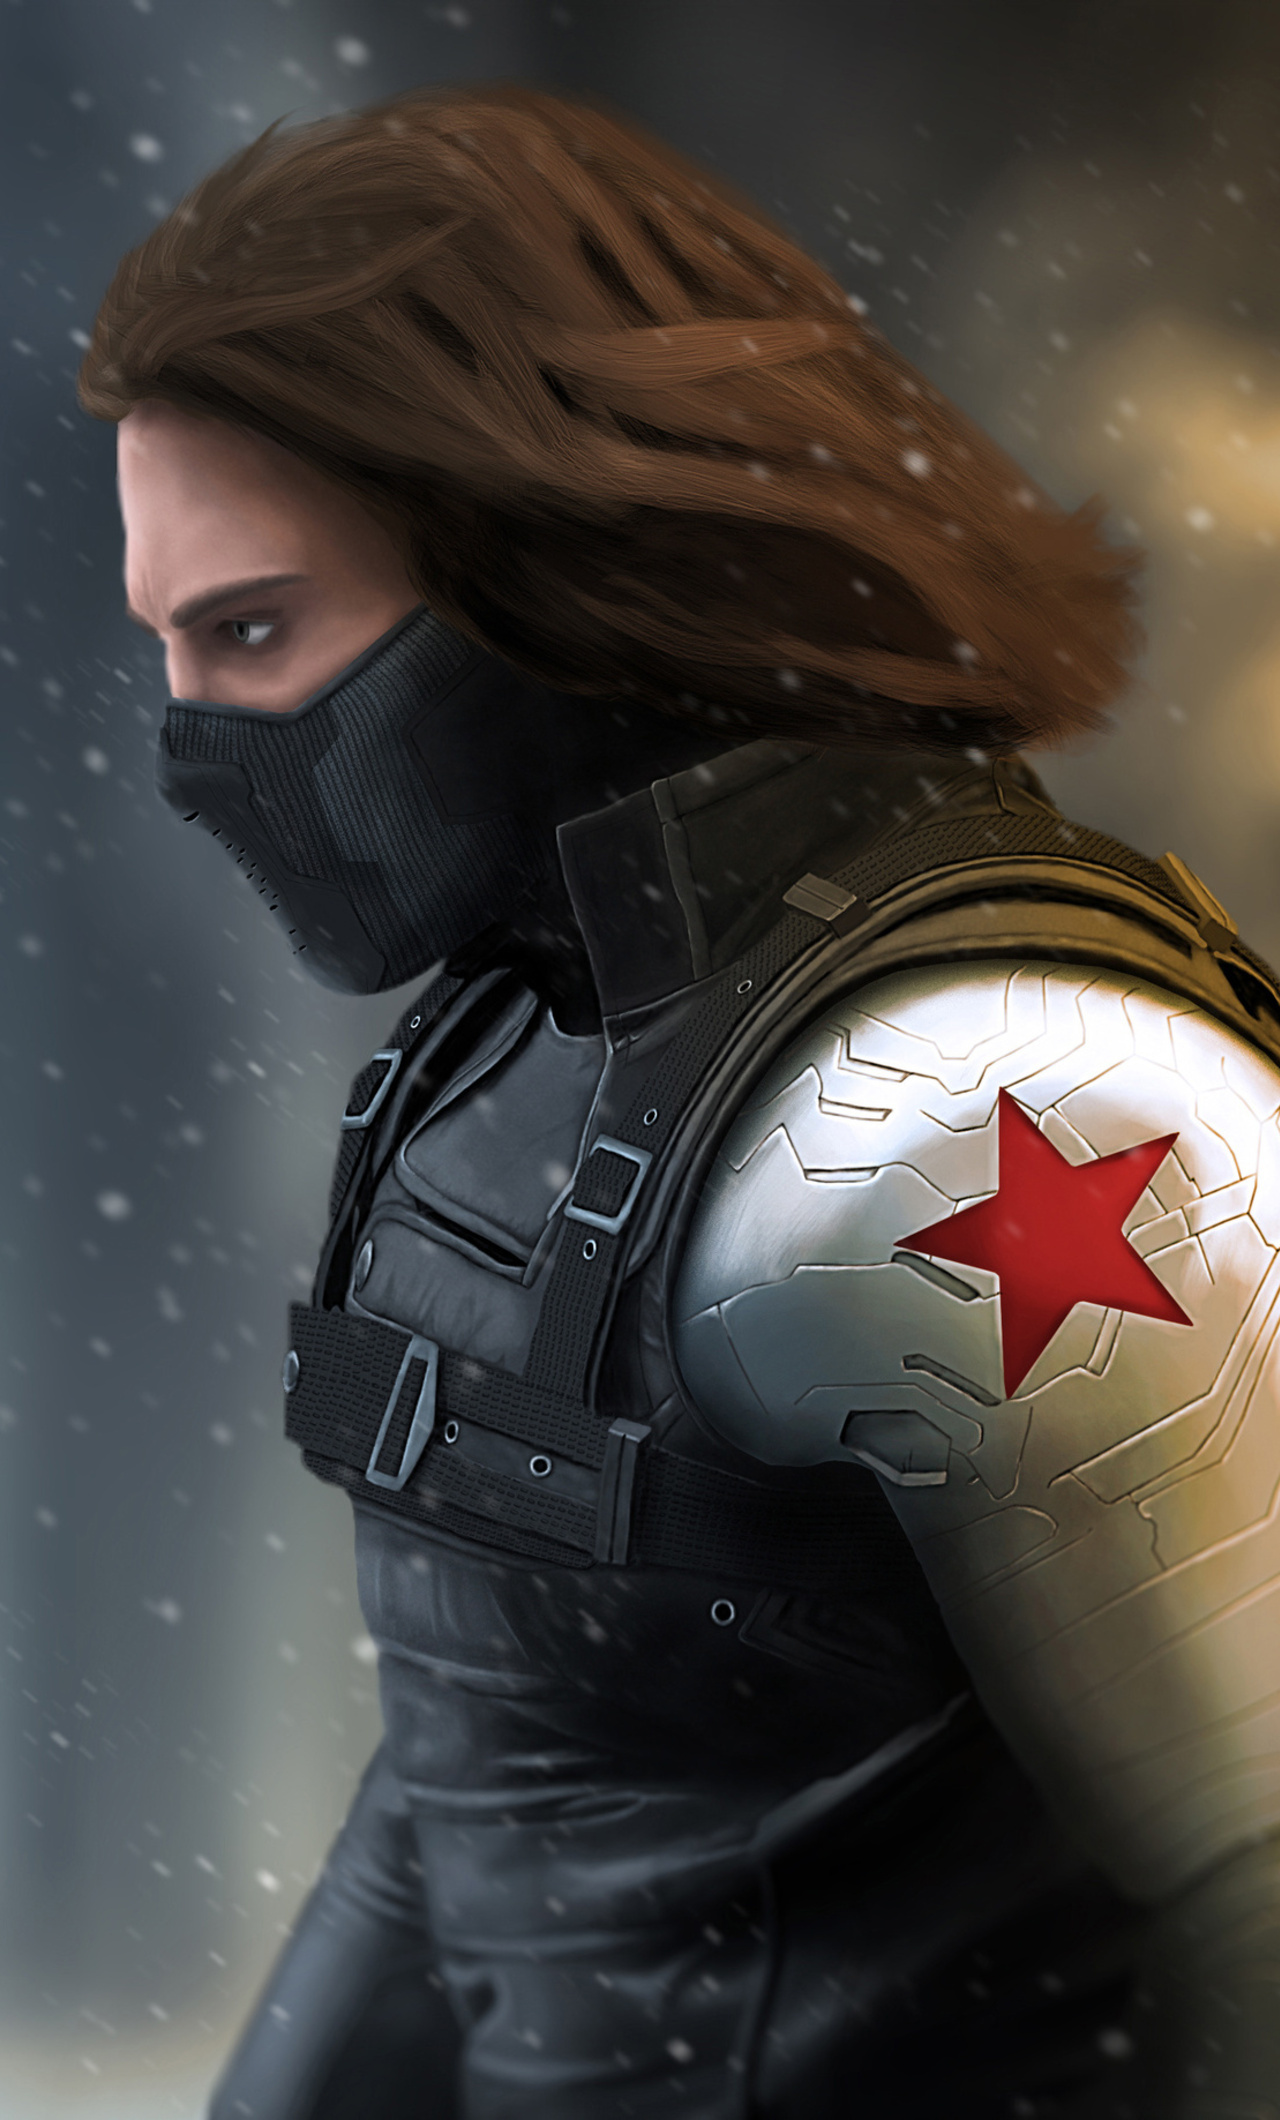 Winter Soldier, 4K iPhone 6 wallpapers, HD 4K images, 1280x2120 HD Phone